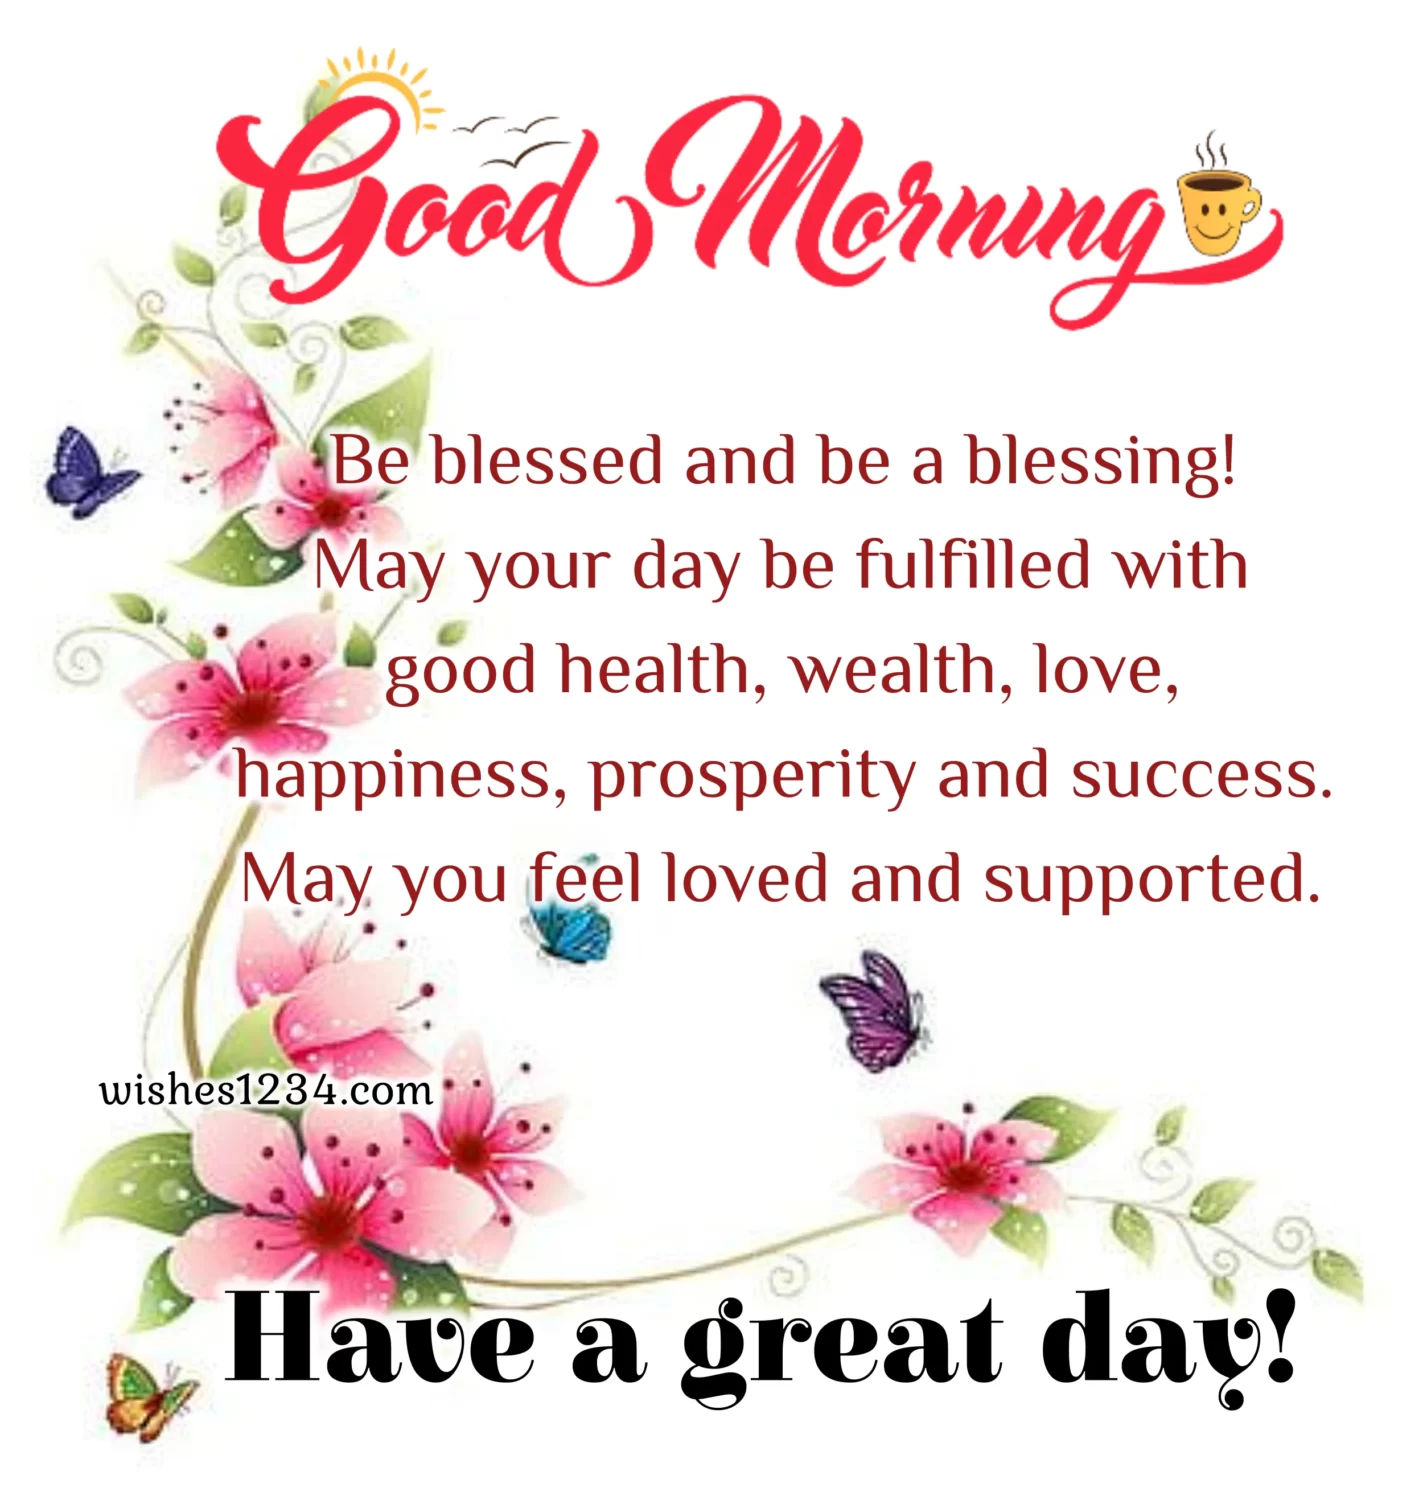 Good morning greetings with flower border, Morning Quotes